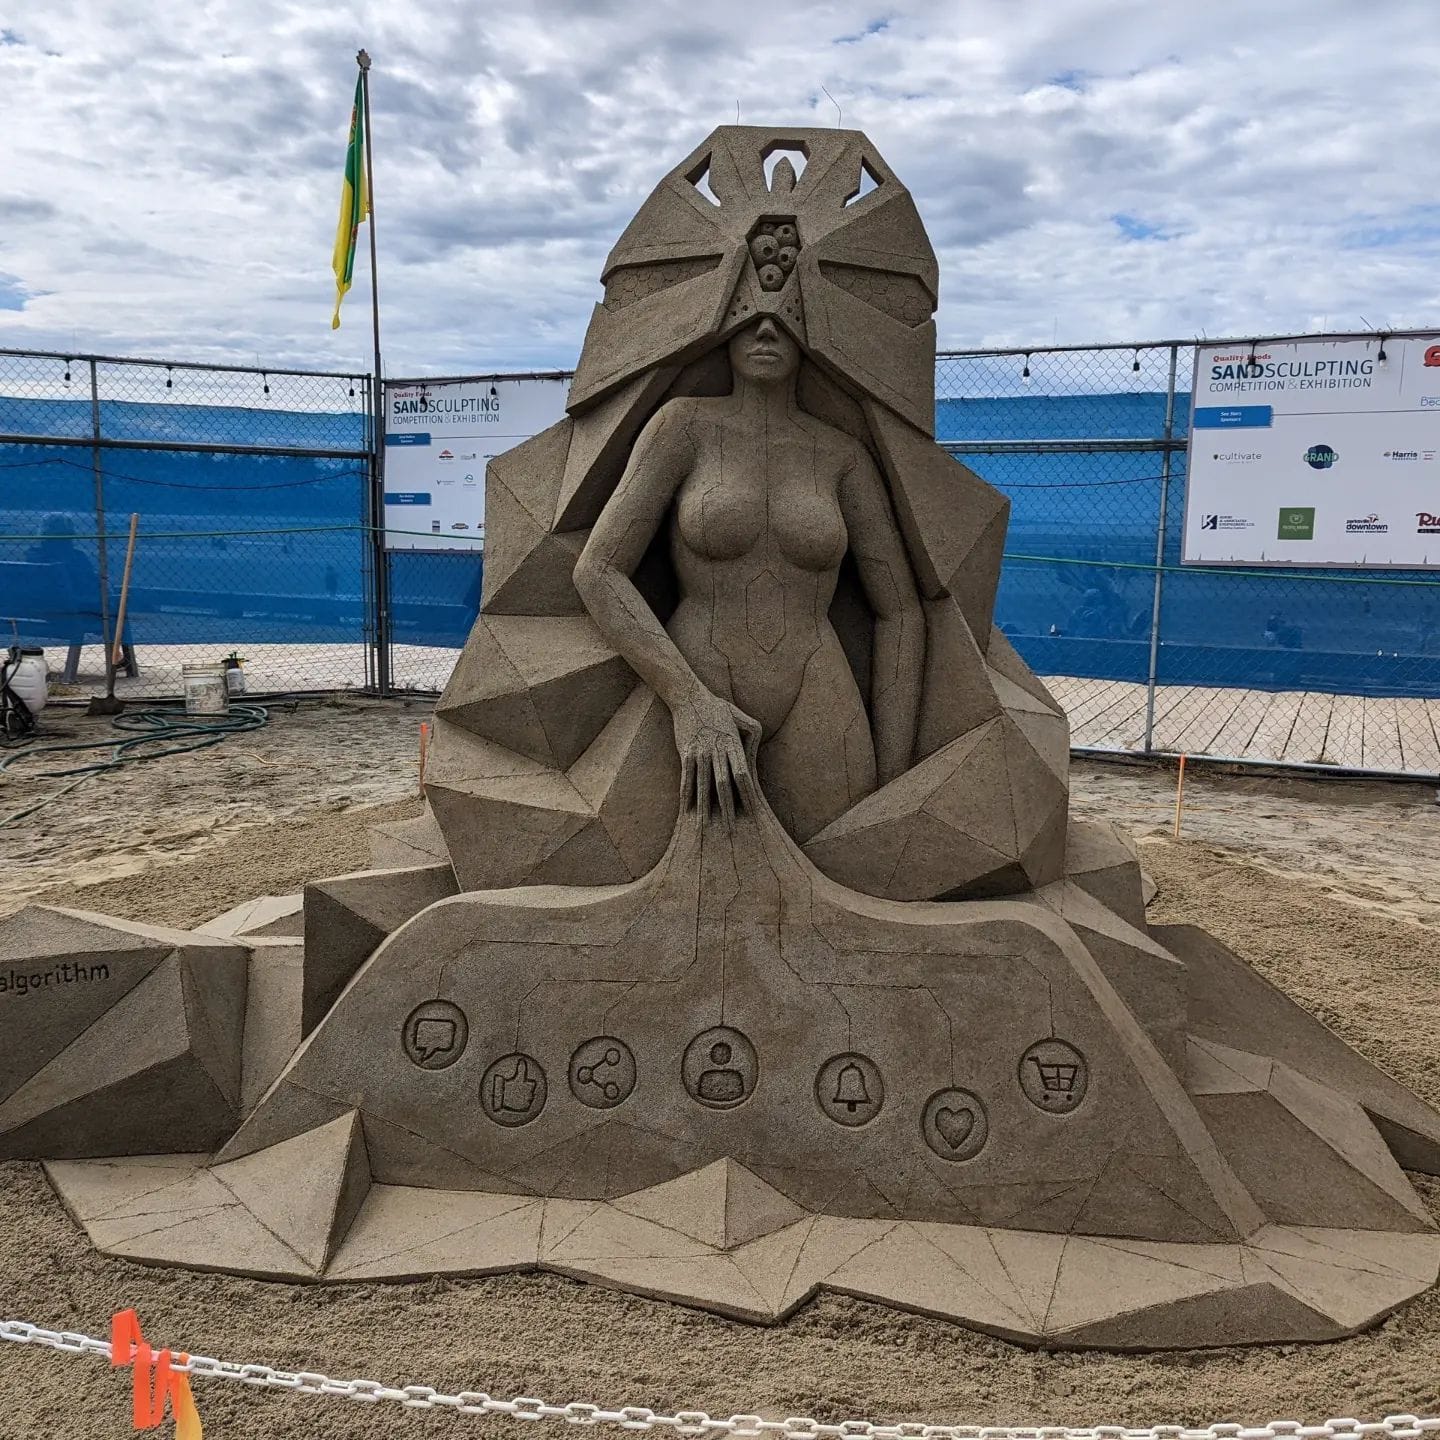 Futuristic sand castle art by Guy-Olivier Deveau shows a blind lady encased in geometric forms. 